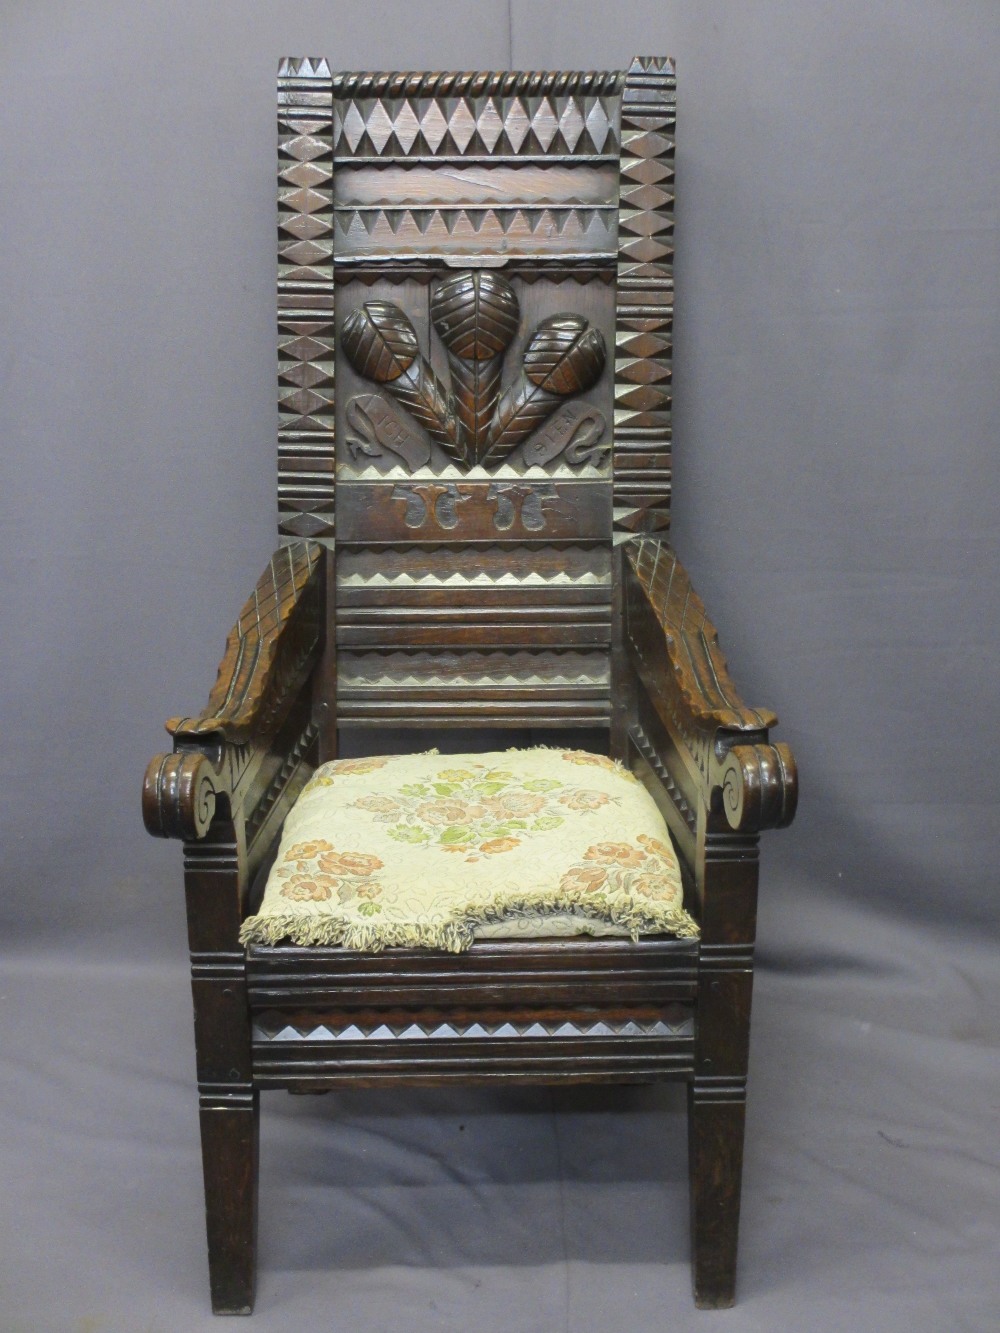 HEAVILY CARVED WELSH EISTEDDFOD TYPE CHAIR, three feathers and 'Ich Dien' carved to the back